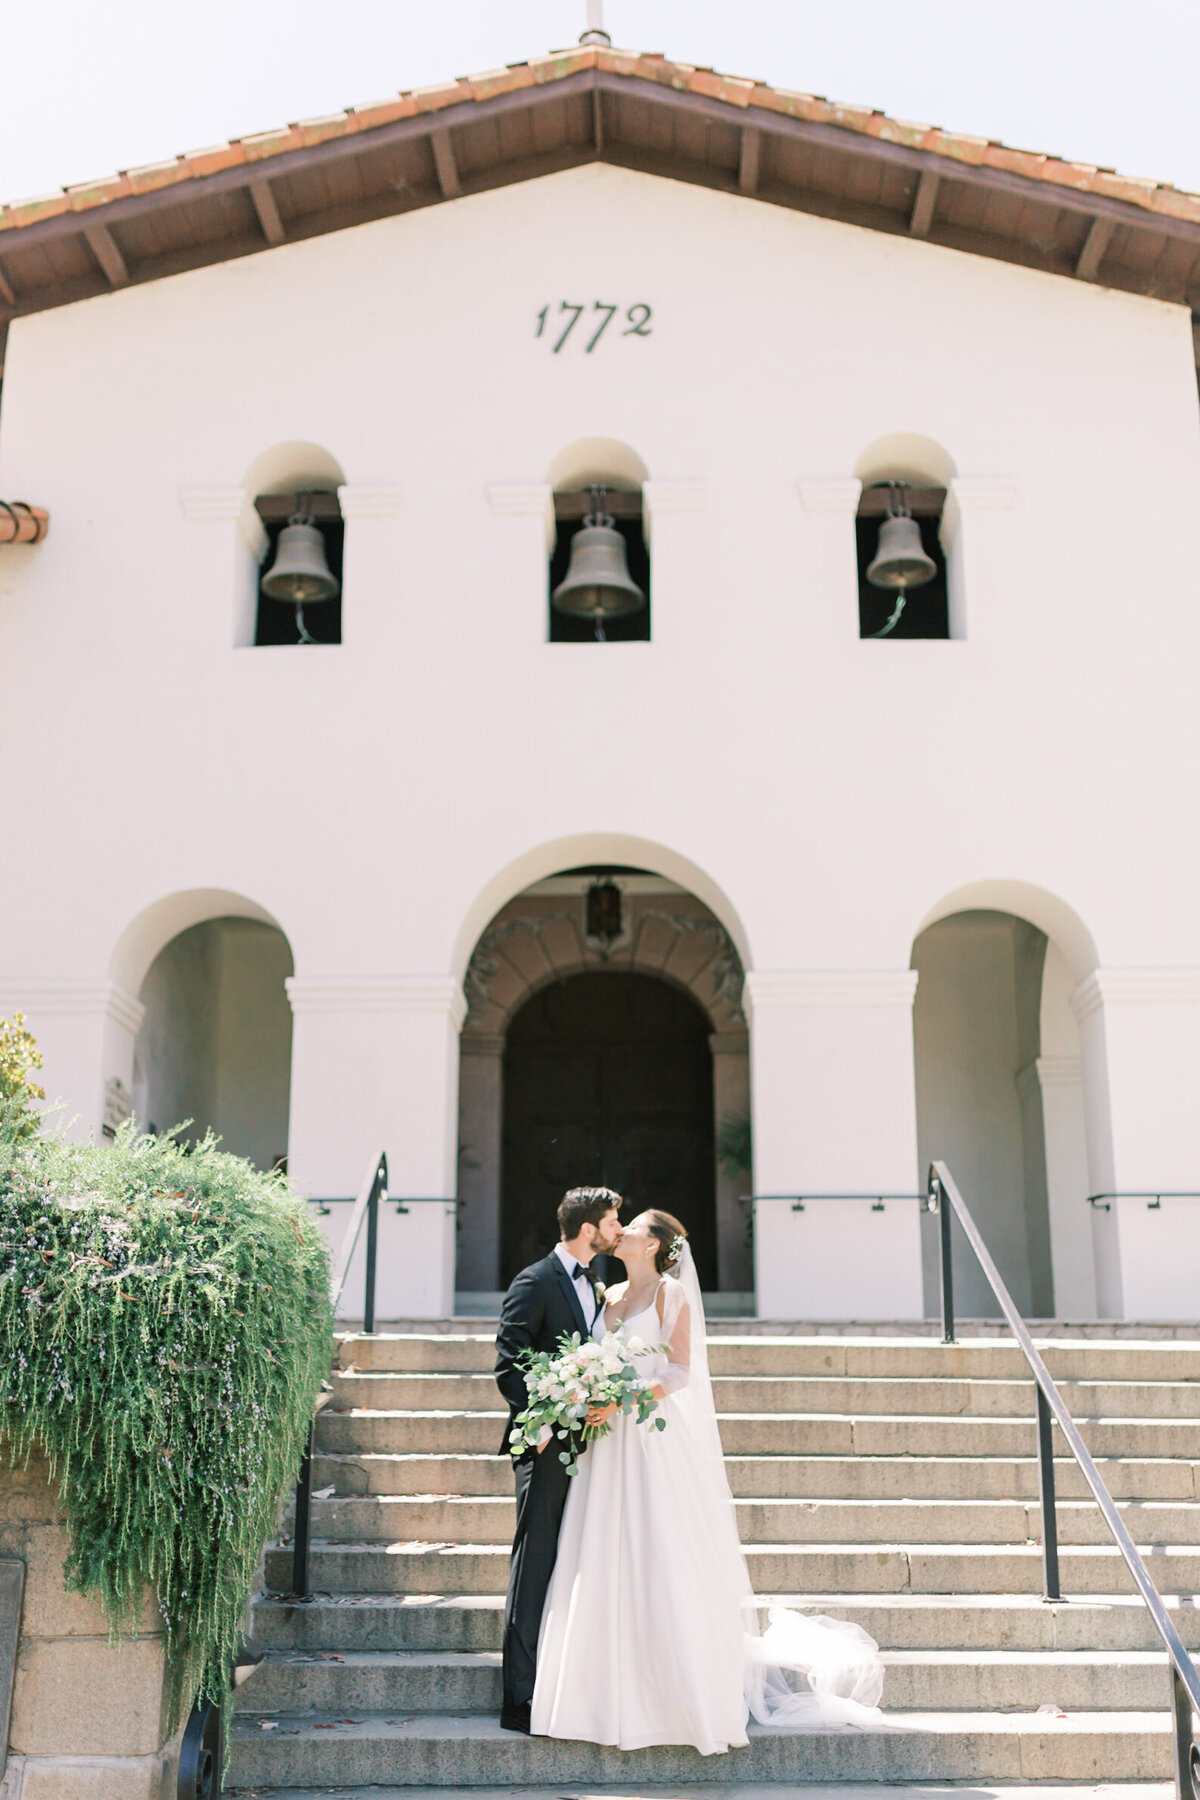 Jocelyn and Spencer Photography California Santa Barbara Wedding Engagement Luxury High End Romantic Imagery Light Airy Fineart Film Style8